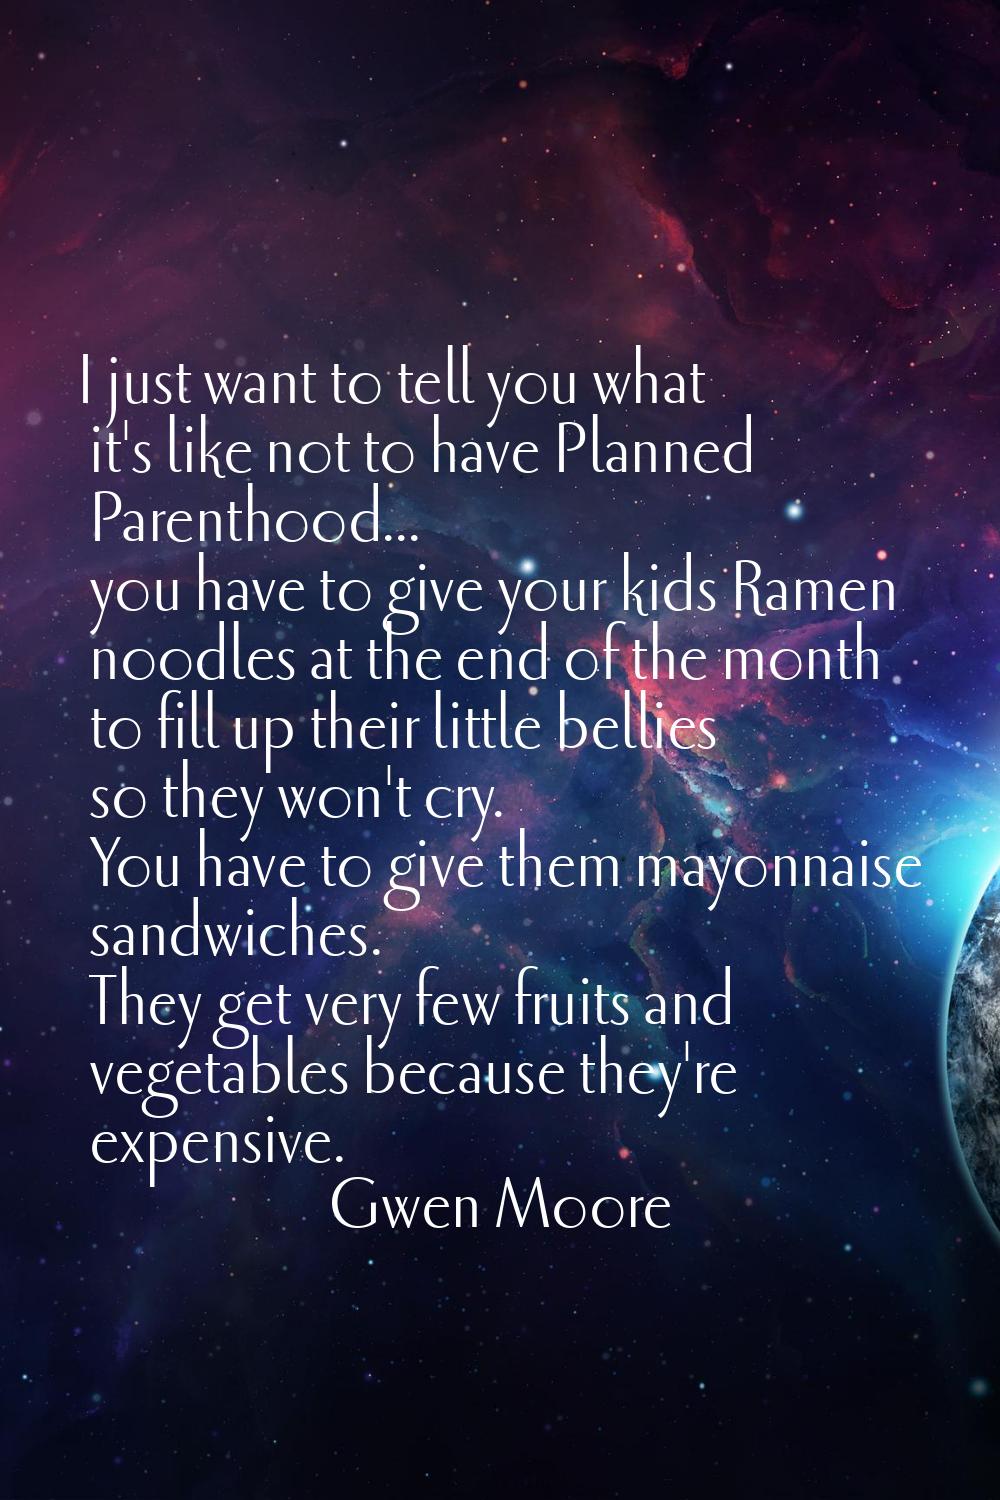 I just want to tell you what it's like not to have Planned Parenthood... you have to give your kids